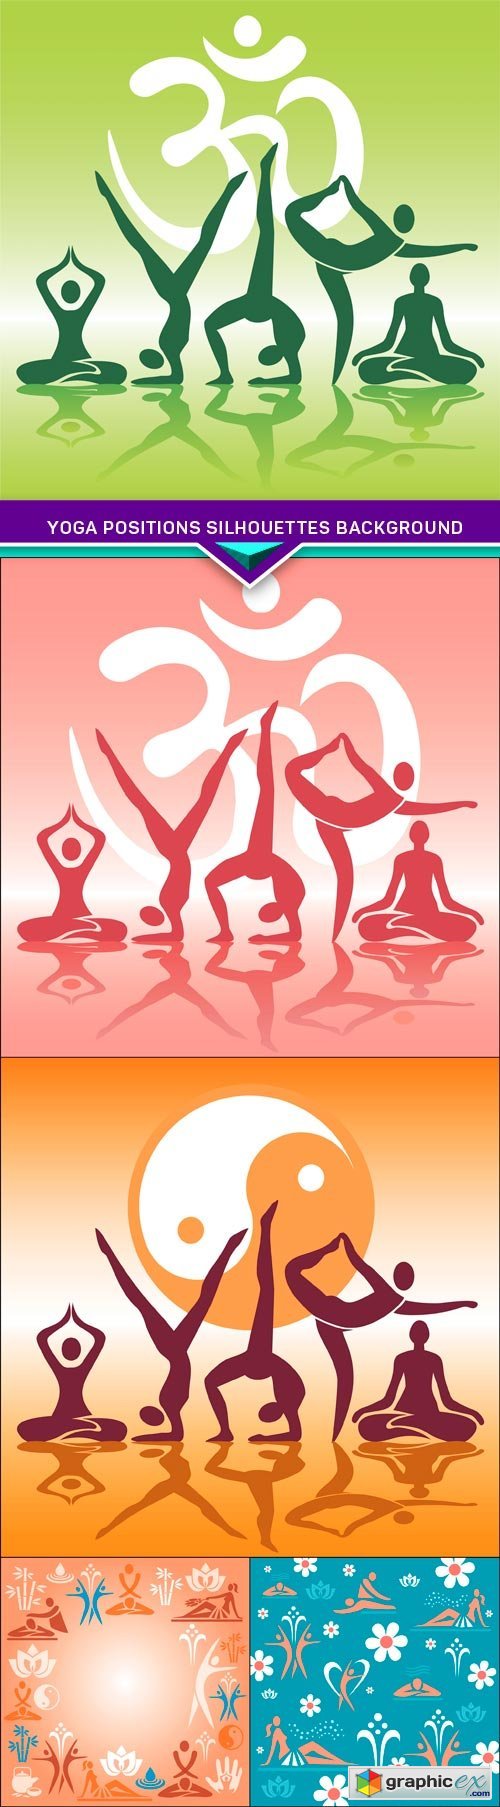 Yoga positions silhouettes background 5X EPS